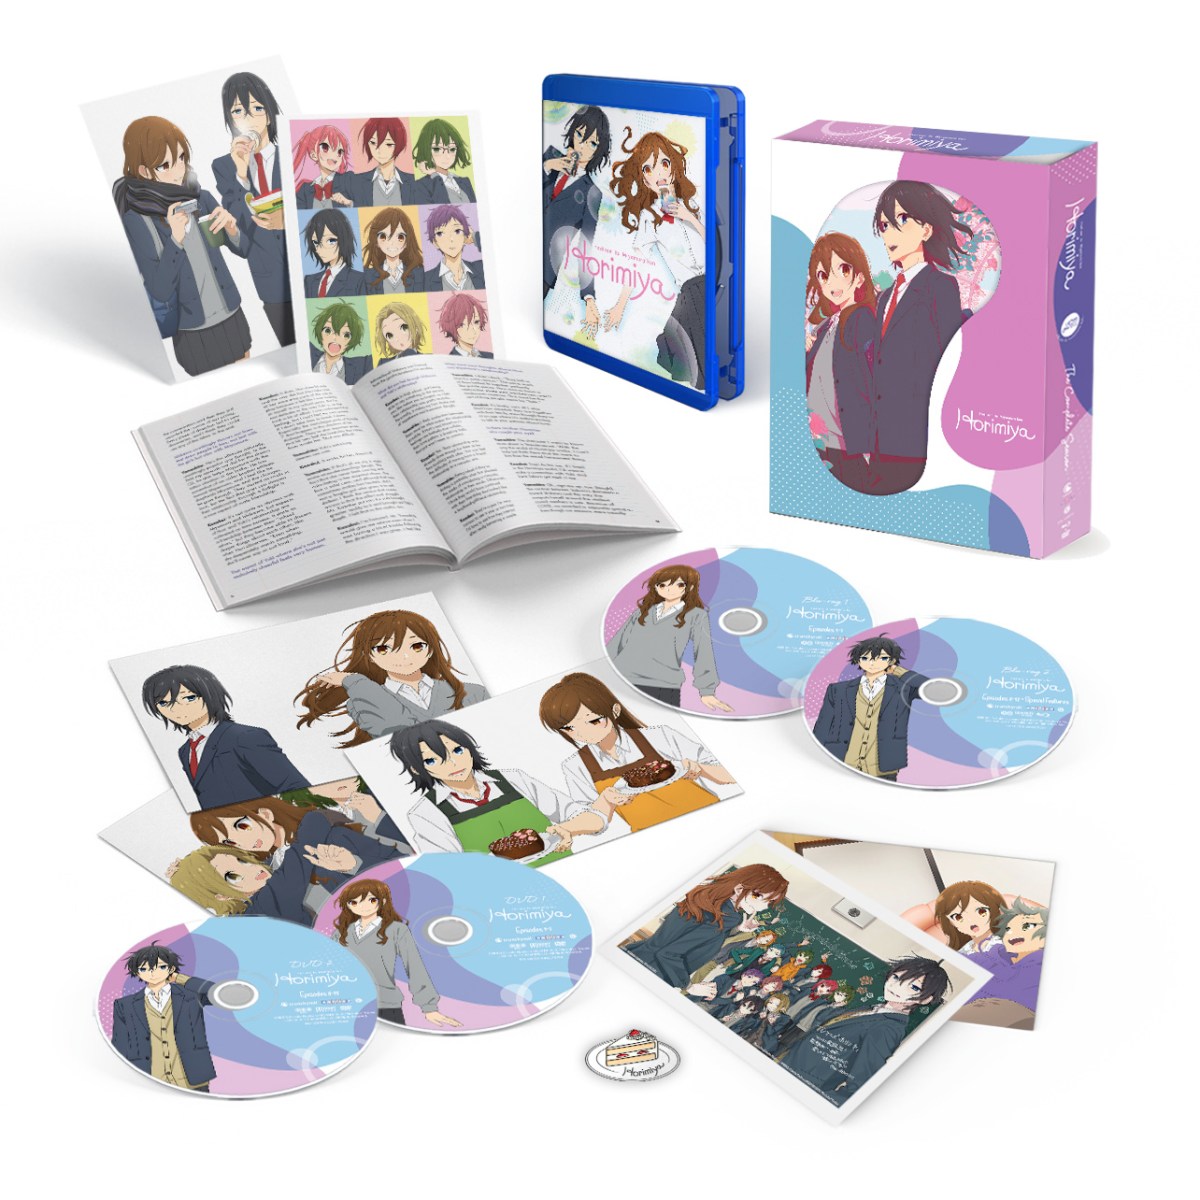 Horimiya and Love After World Domination DVD & Blu-ray Releases Set